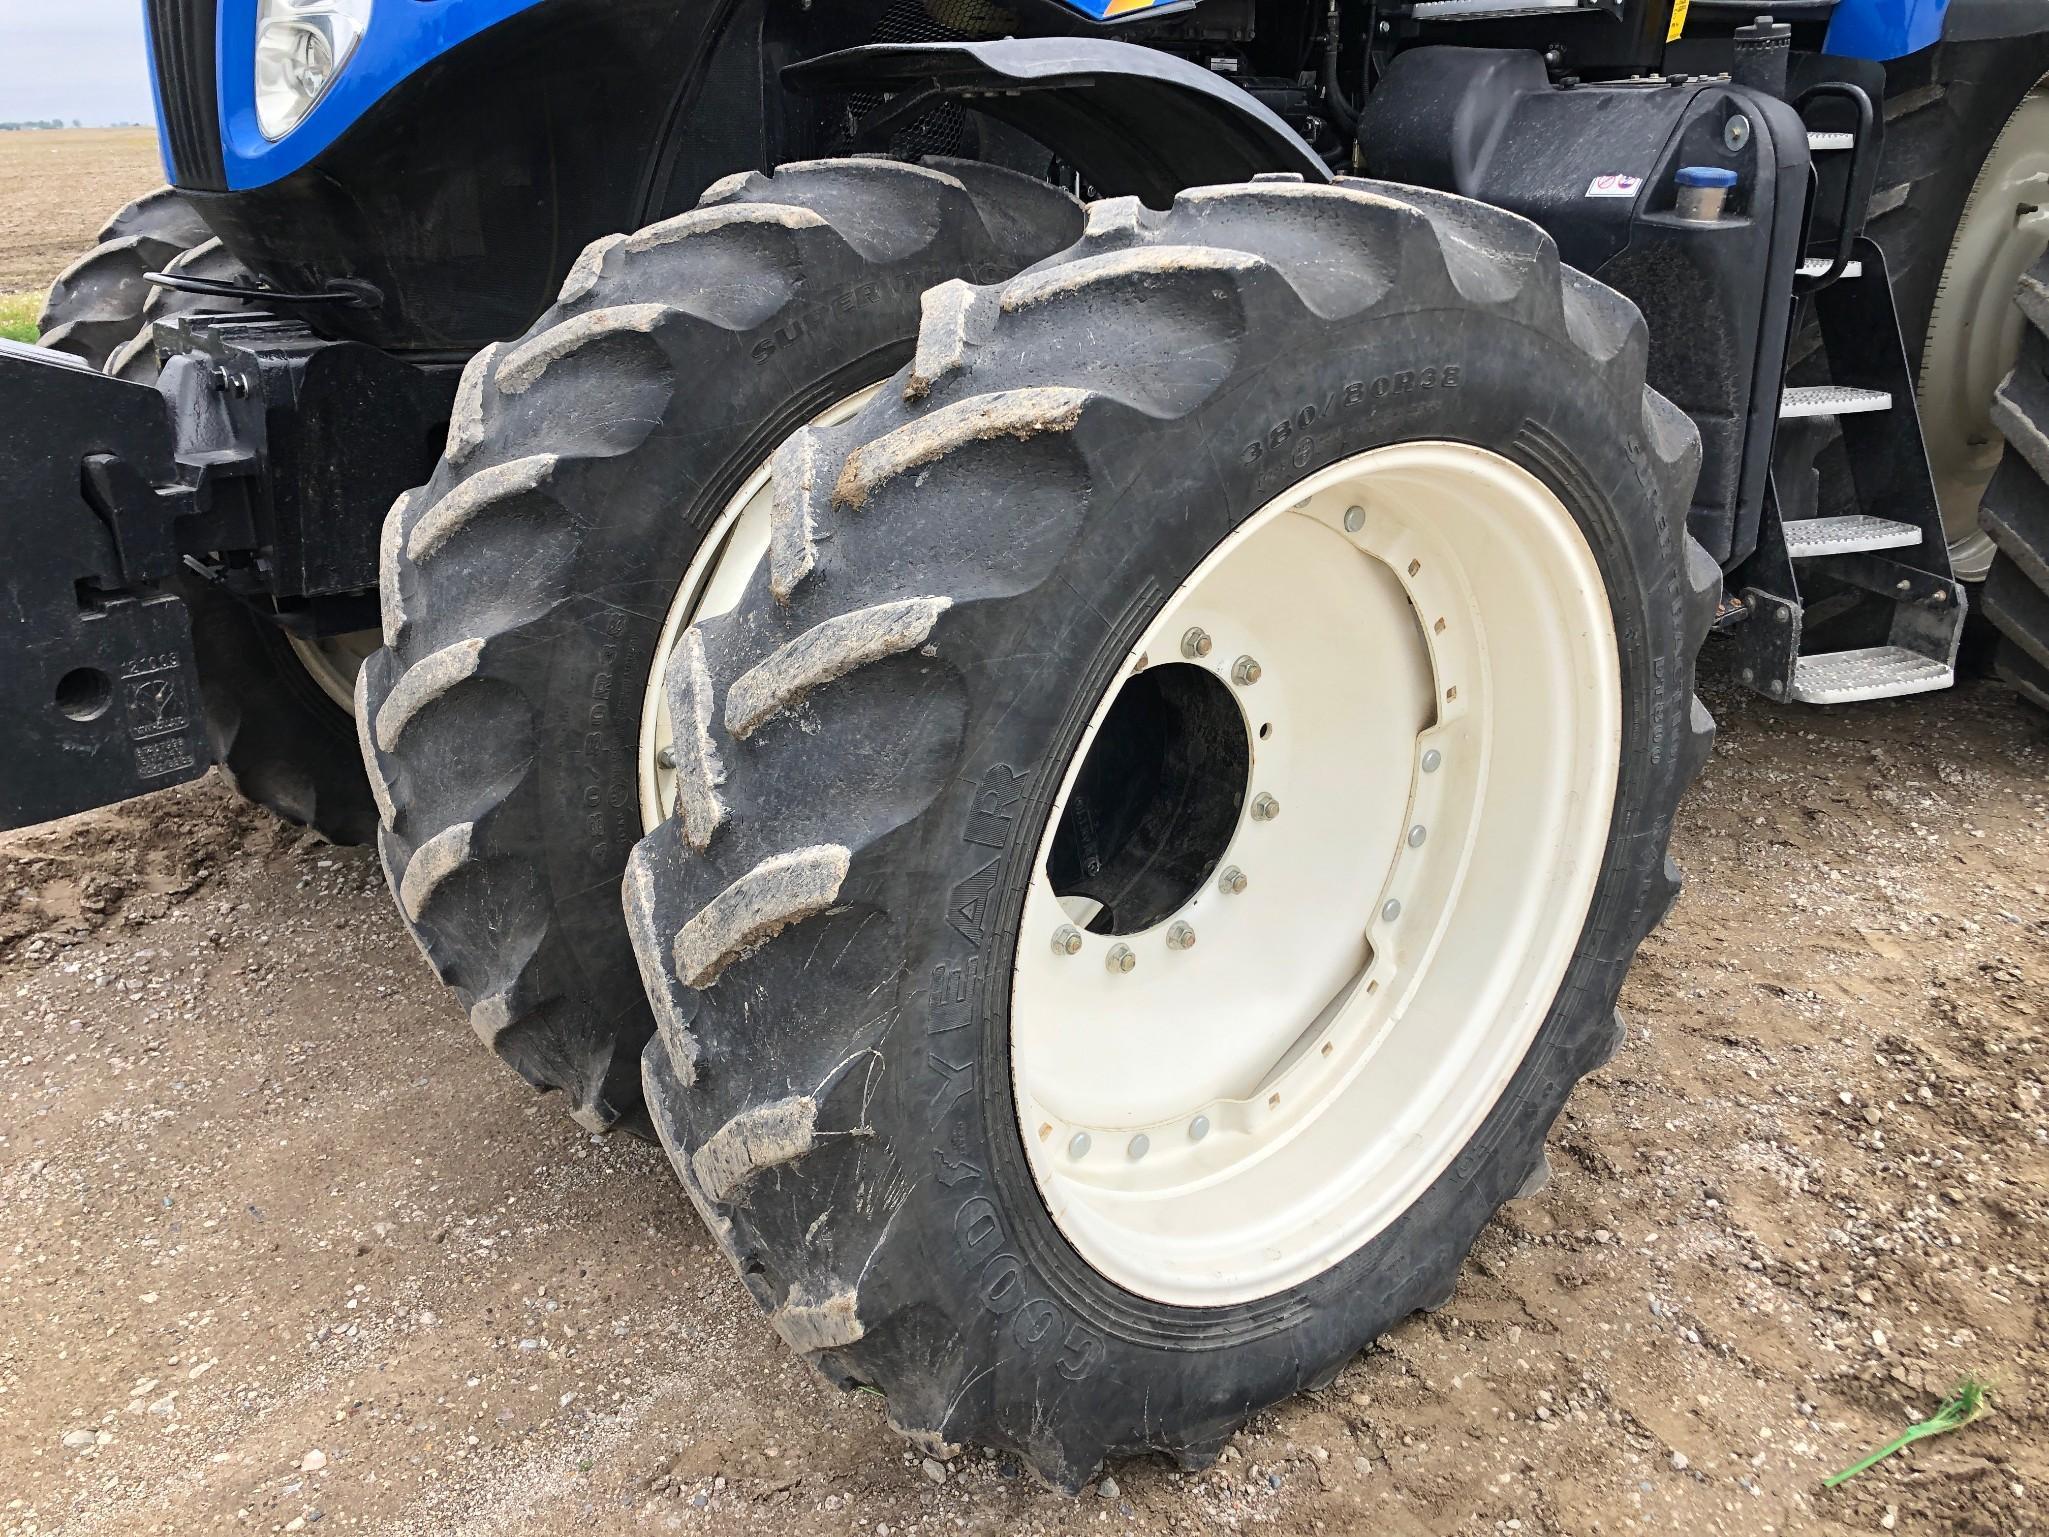 2013 New Holland T8.360 MFWD tractor